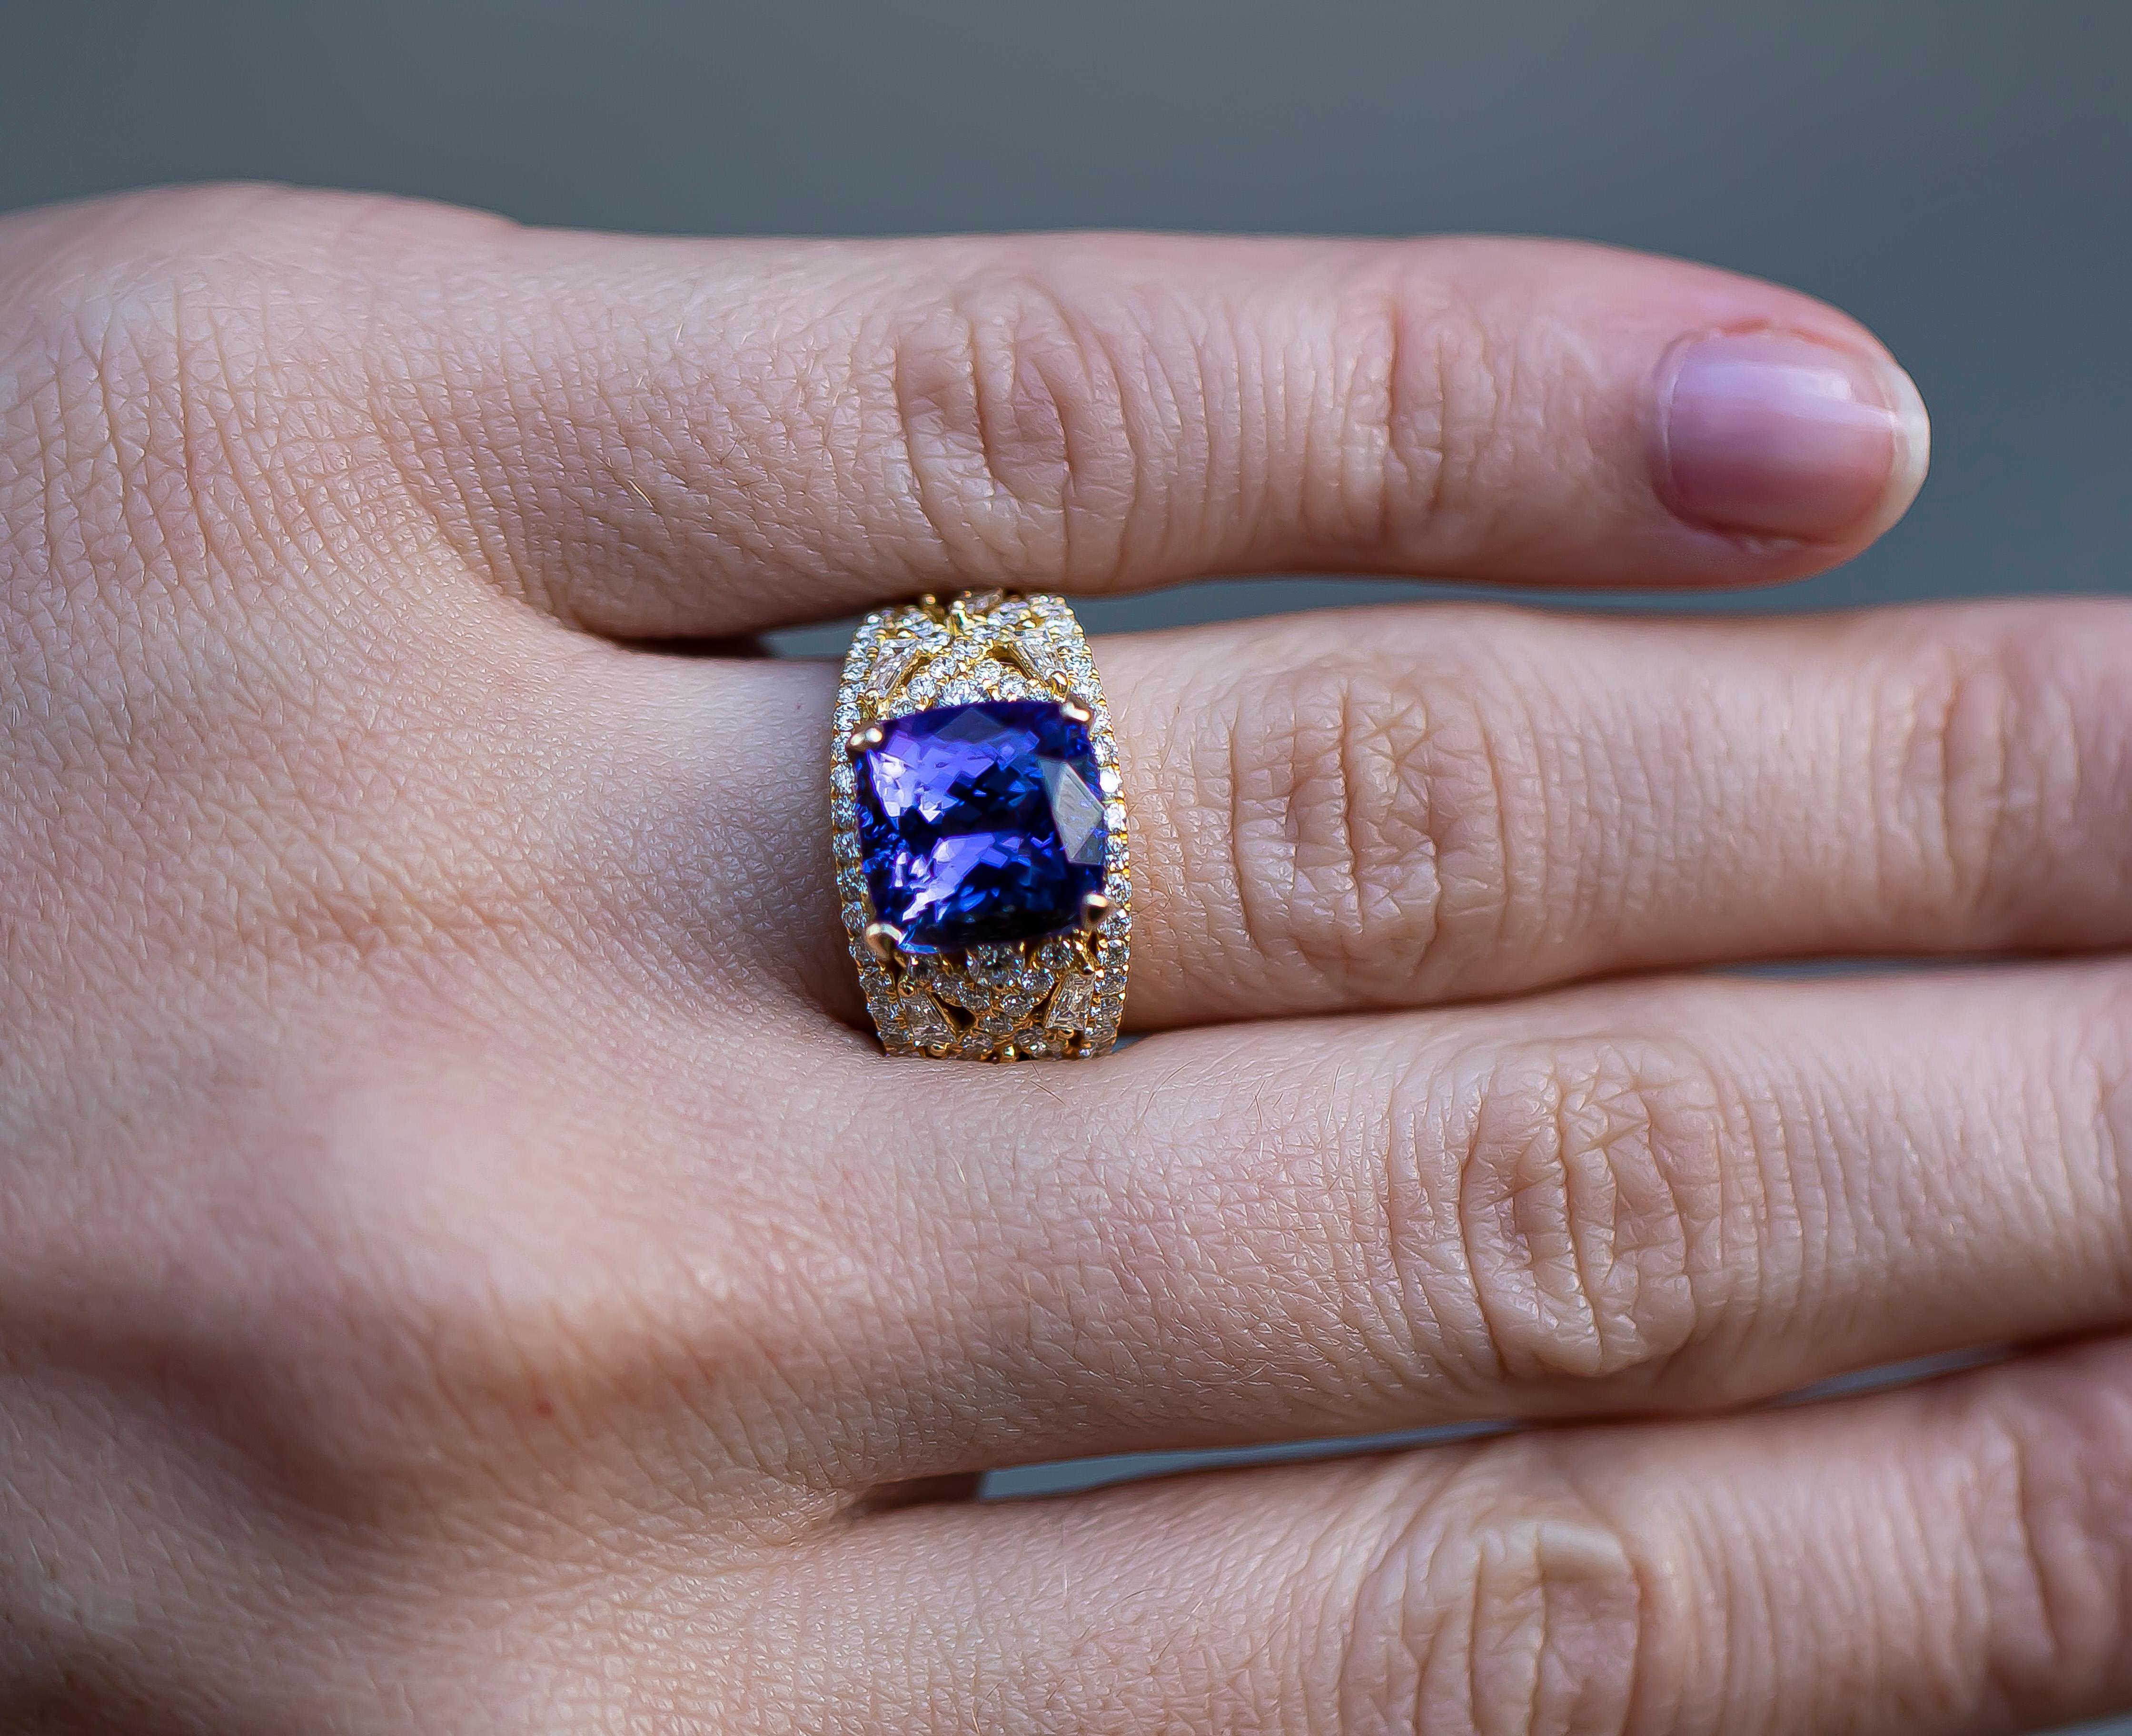 No Heat Tanzanite = 3.85 carat
Diamonds = 2.59 carats
( Color: F, Clarity: VS )
Metal = 18K Yellow Gold
Ring Size = 6 1/2
Complimentary Resizing Available
Jewelry Gift Box Included